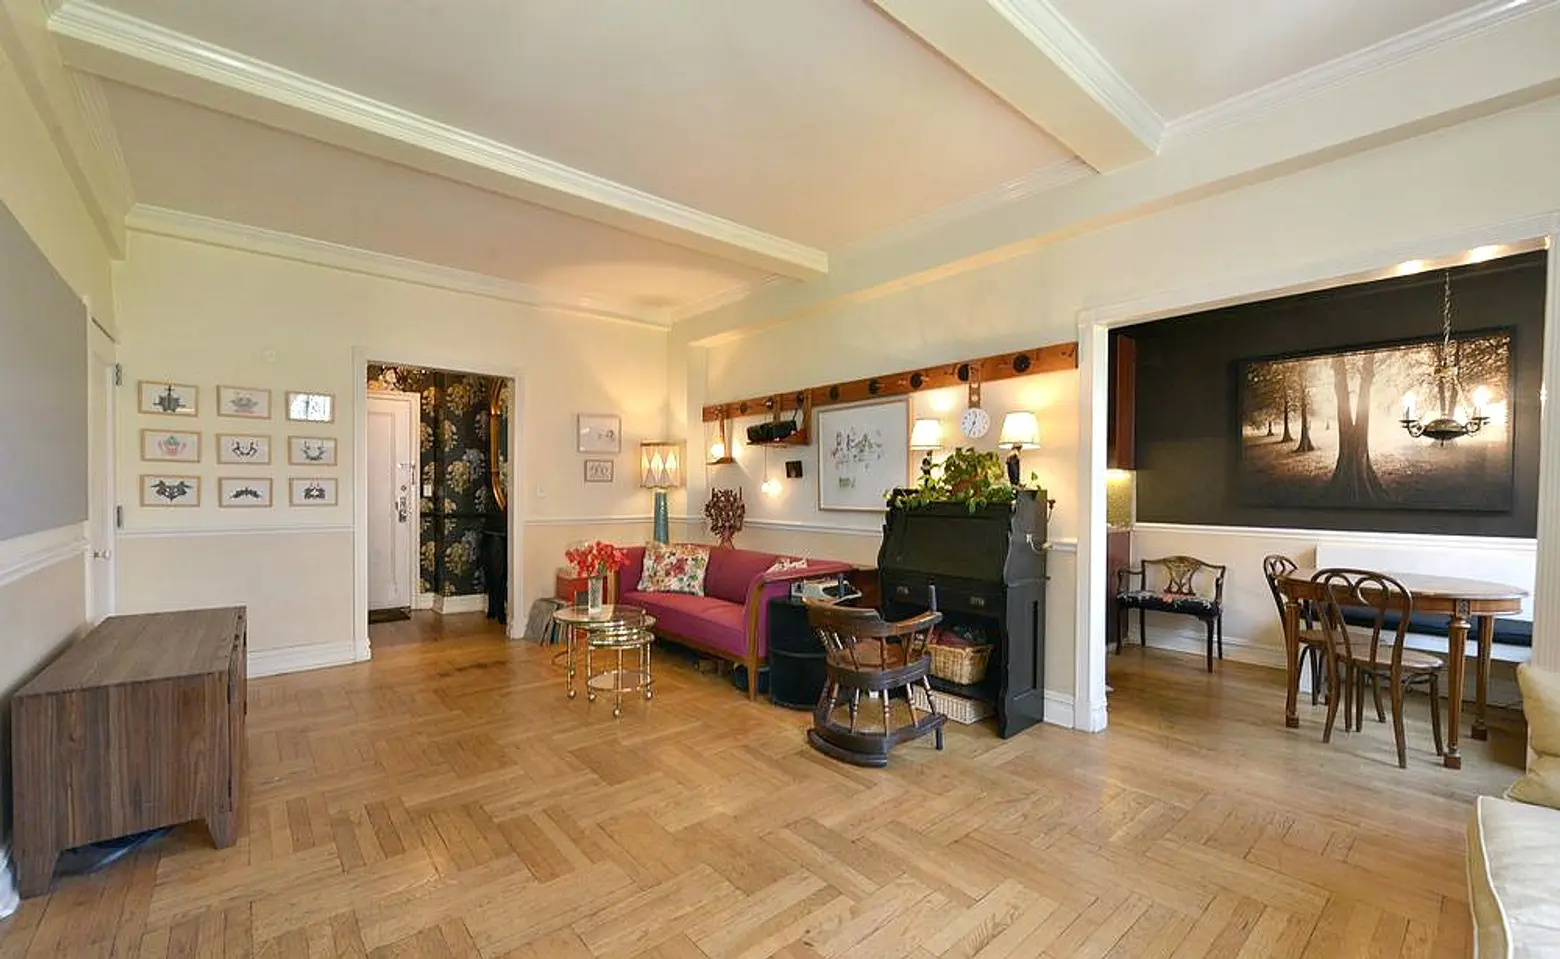 30 Fifth Avenue, Greenwich Village co-ops, Parker Posey, NYC celebrity real estate